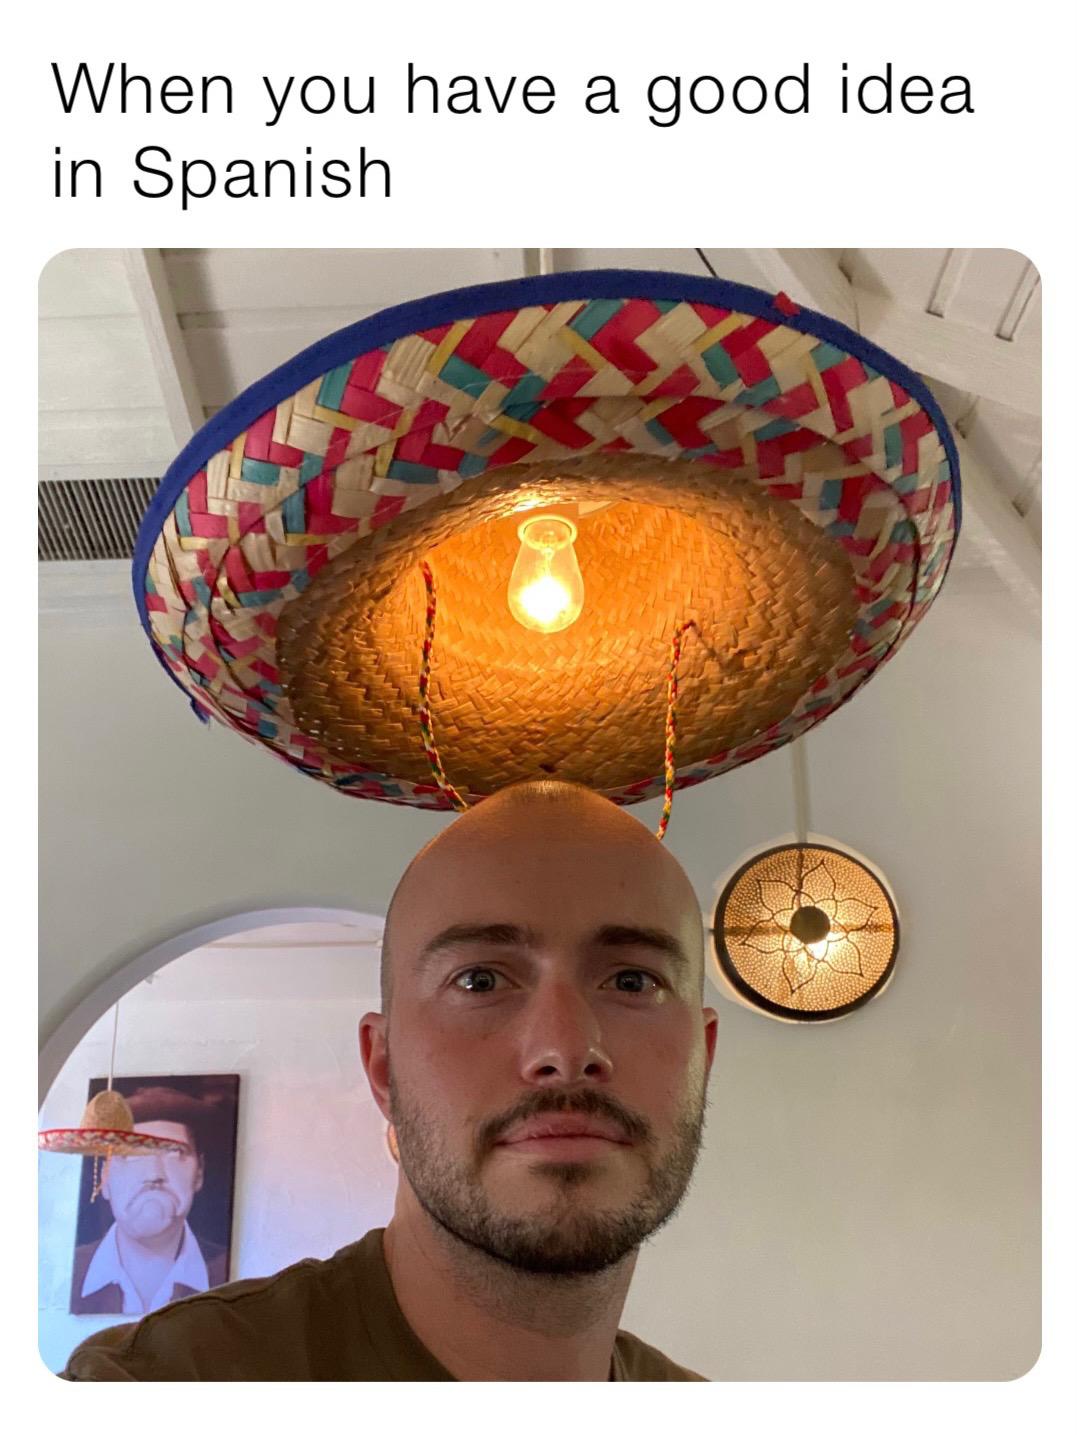 lampshade - a When you have a good idea in Spanish